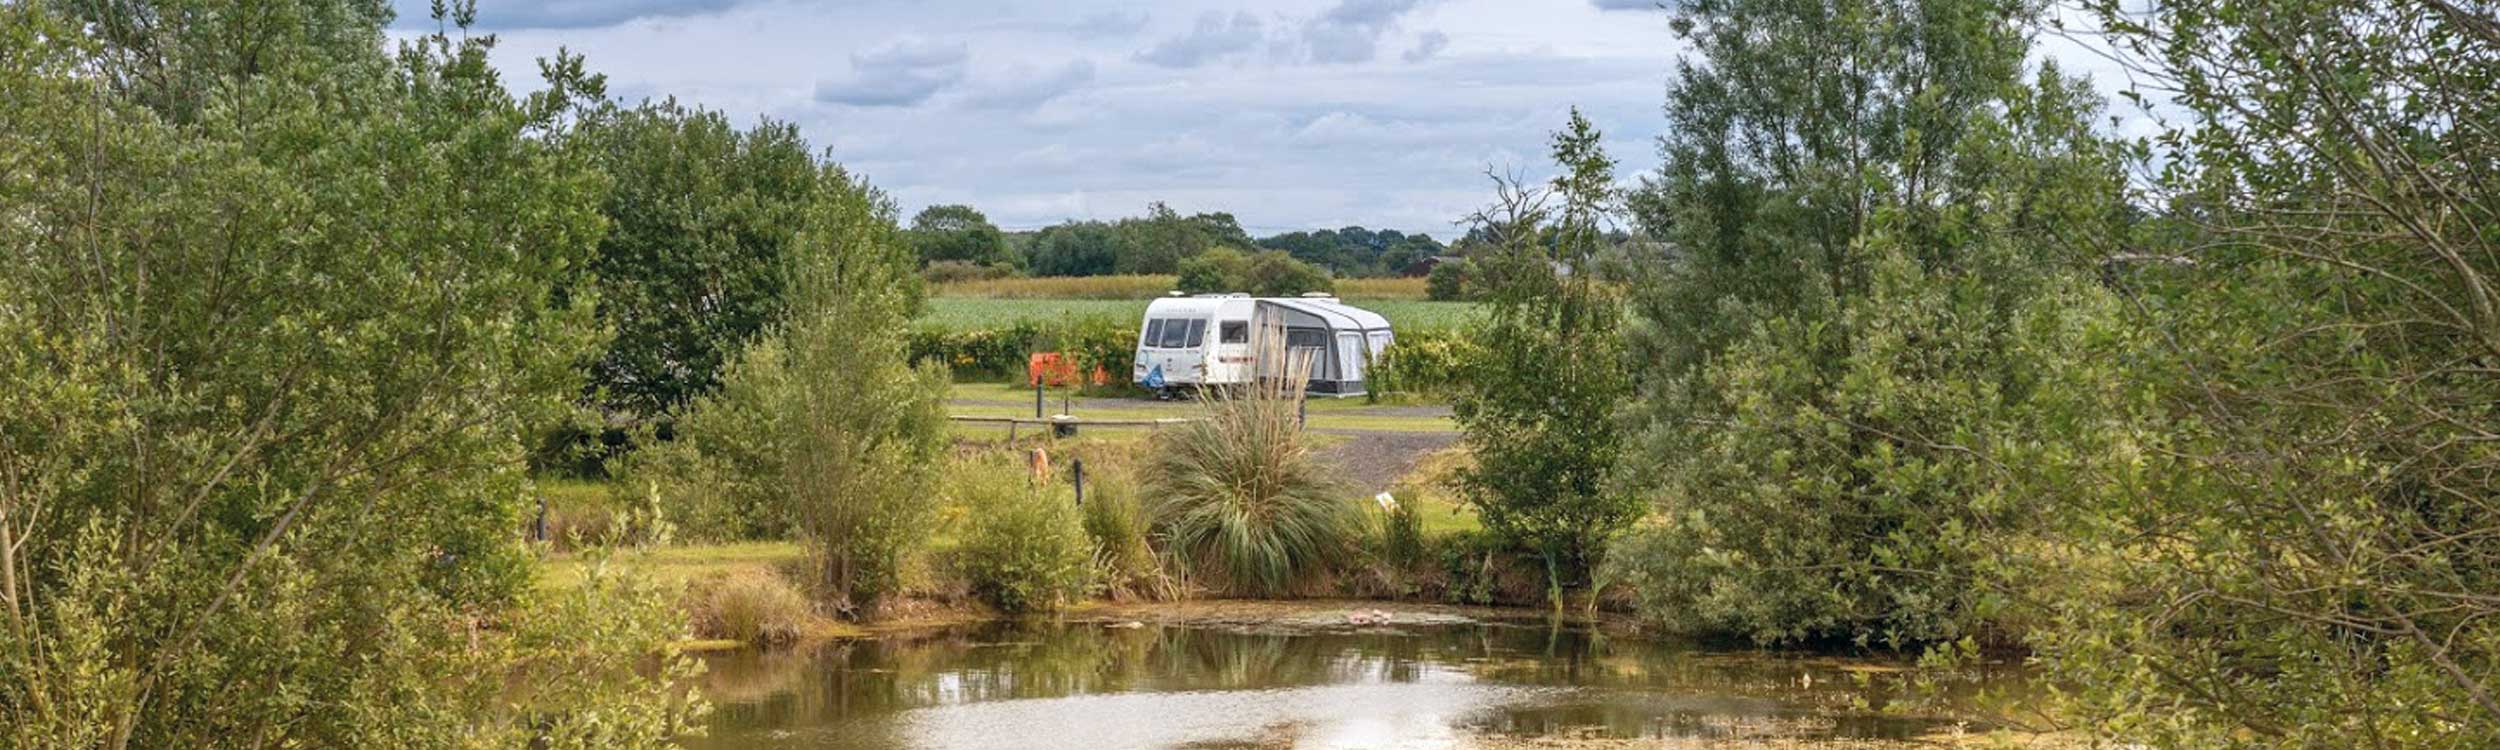 Caravan site at Torworth Grange, Retford, camping and caravanning, pitch up and stay at our lovely campsite near clumber park, sherwood forest, Rufford country park, rural countryside in Nottinghamshire